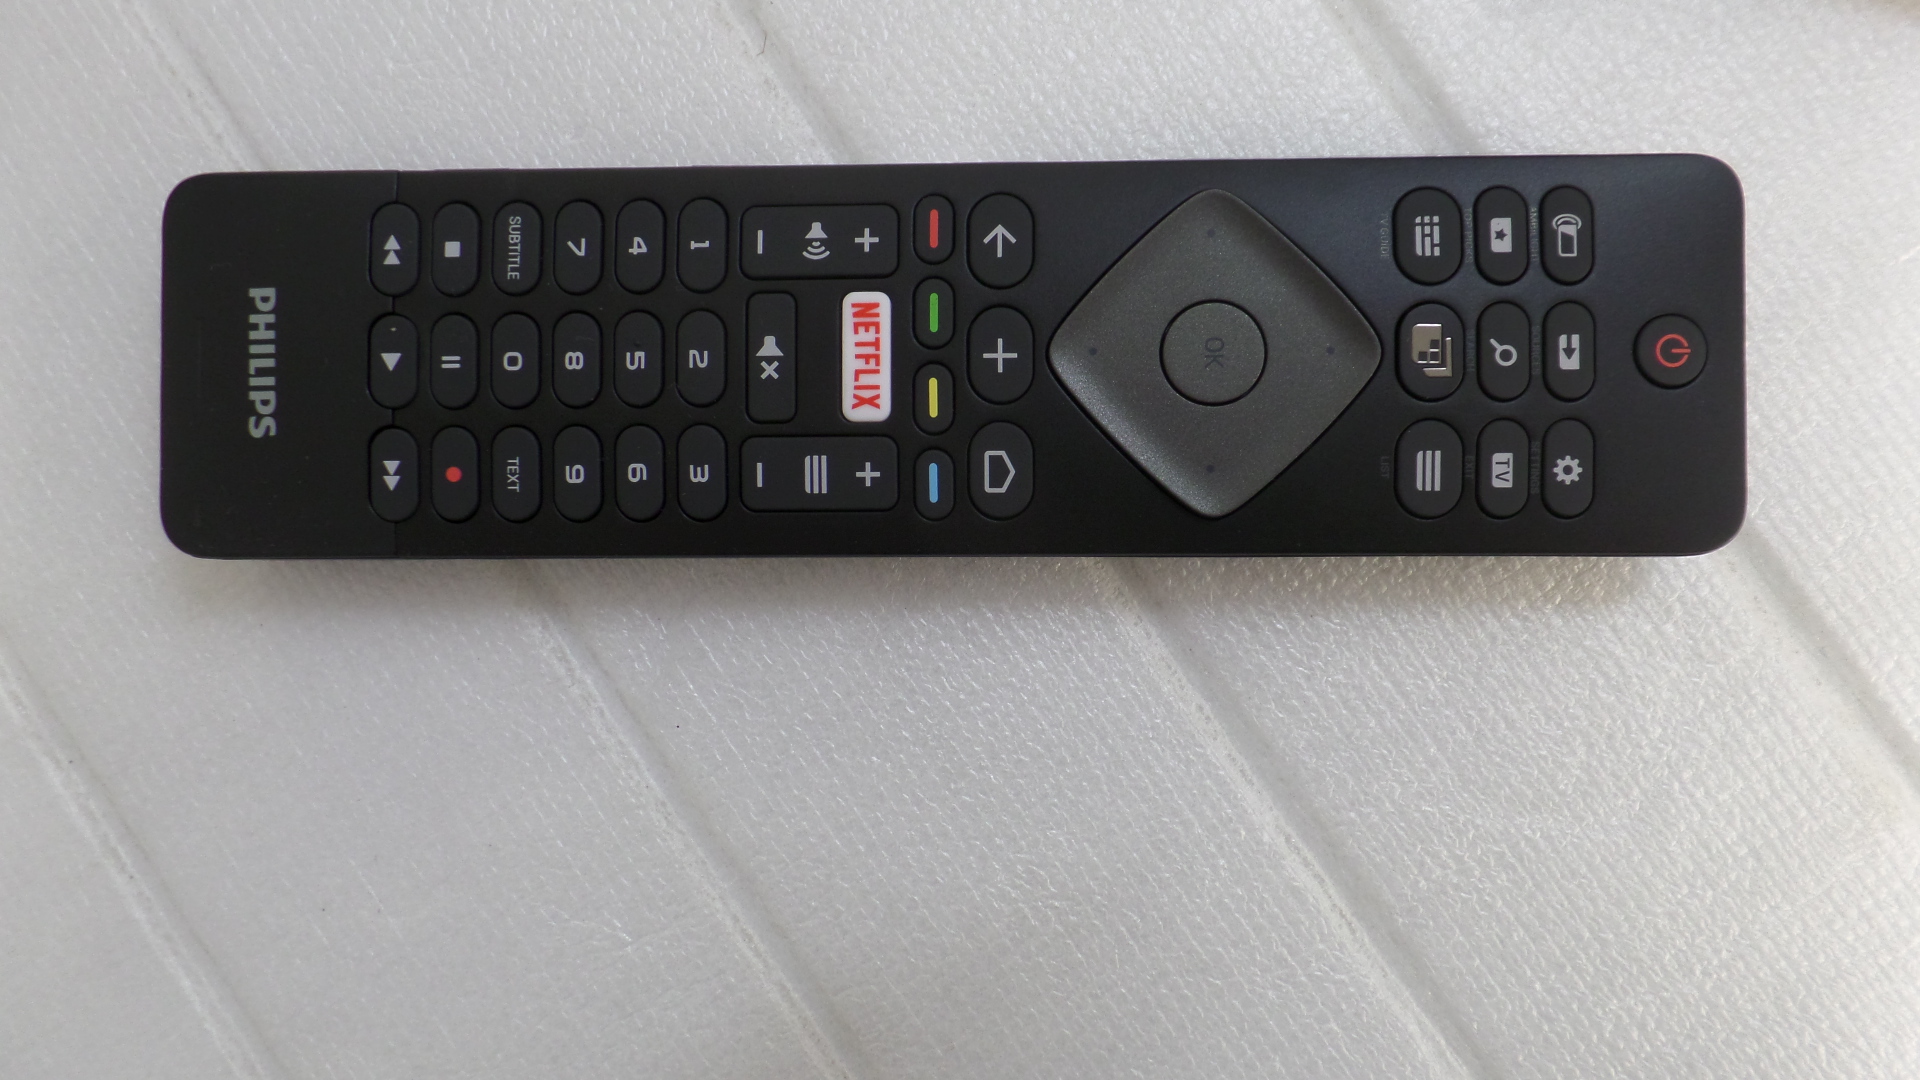 996597001250 1176, ;REMOTE PHILIPS RC-GE017-420 ENGLISH(IR), 398GR10BEPHN0007DP double keyboard infrared remote!